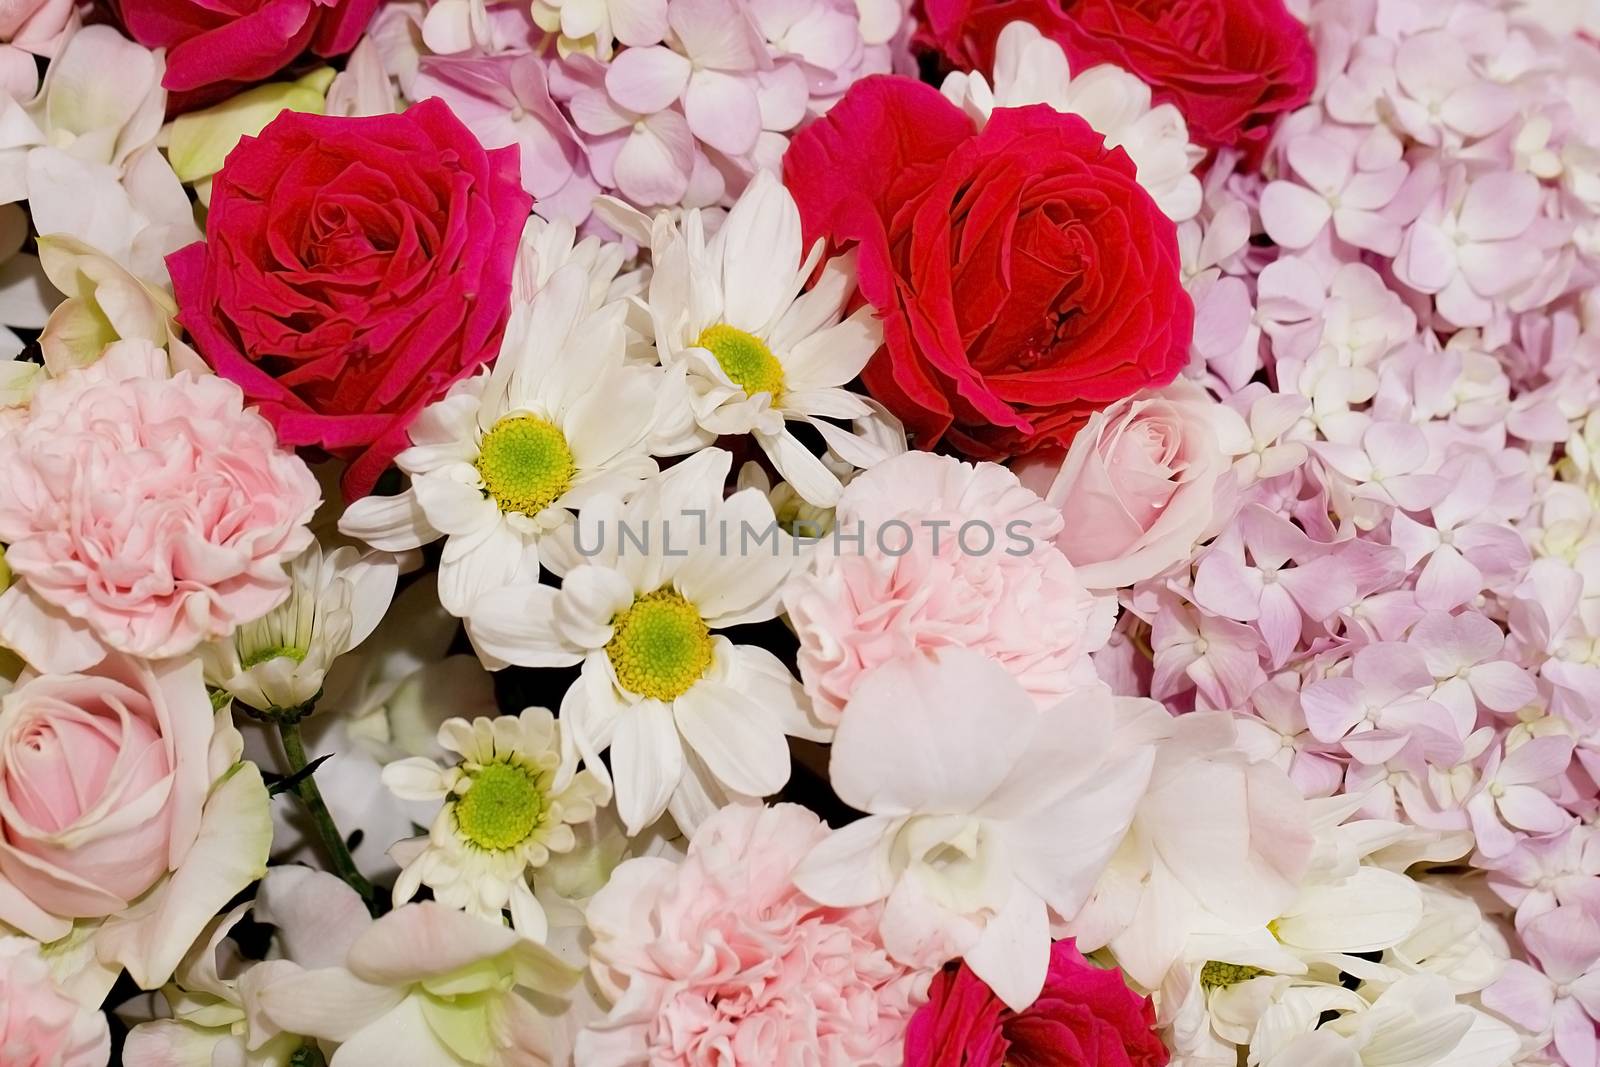 Colorful fower background - natural texture of love - Red and Pink Roses